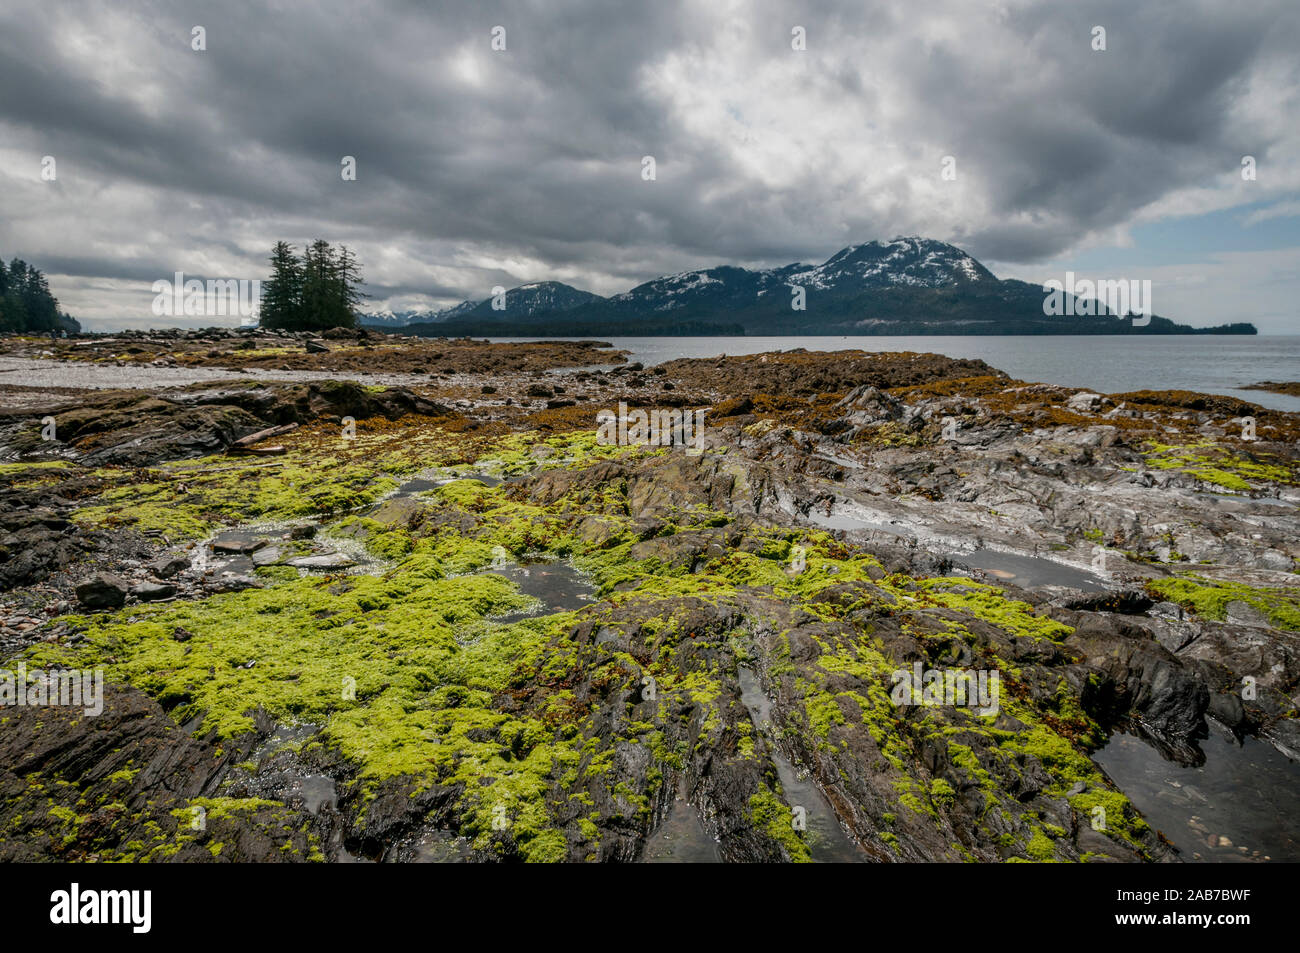 Landscape showing intertidal zone of Rotary Beach, Revillagigedo Channel and Annette Island (on horizon), Ketchikan, Alaska, USA Stock Photo